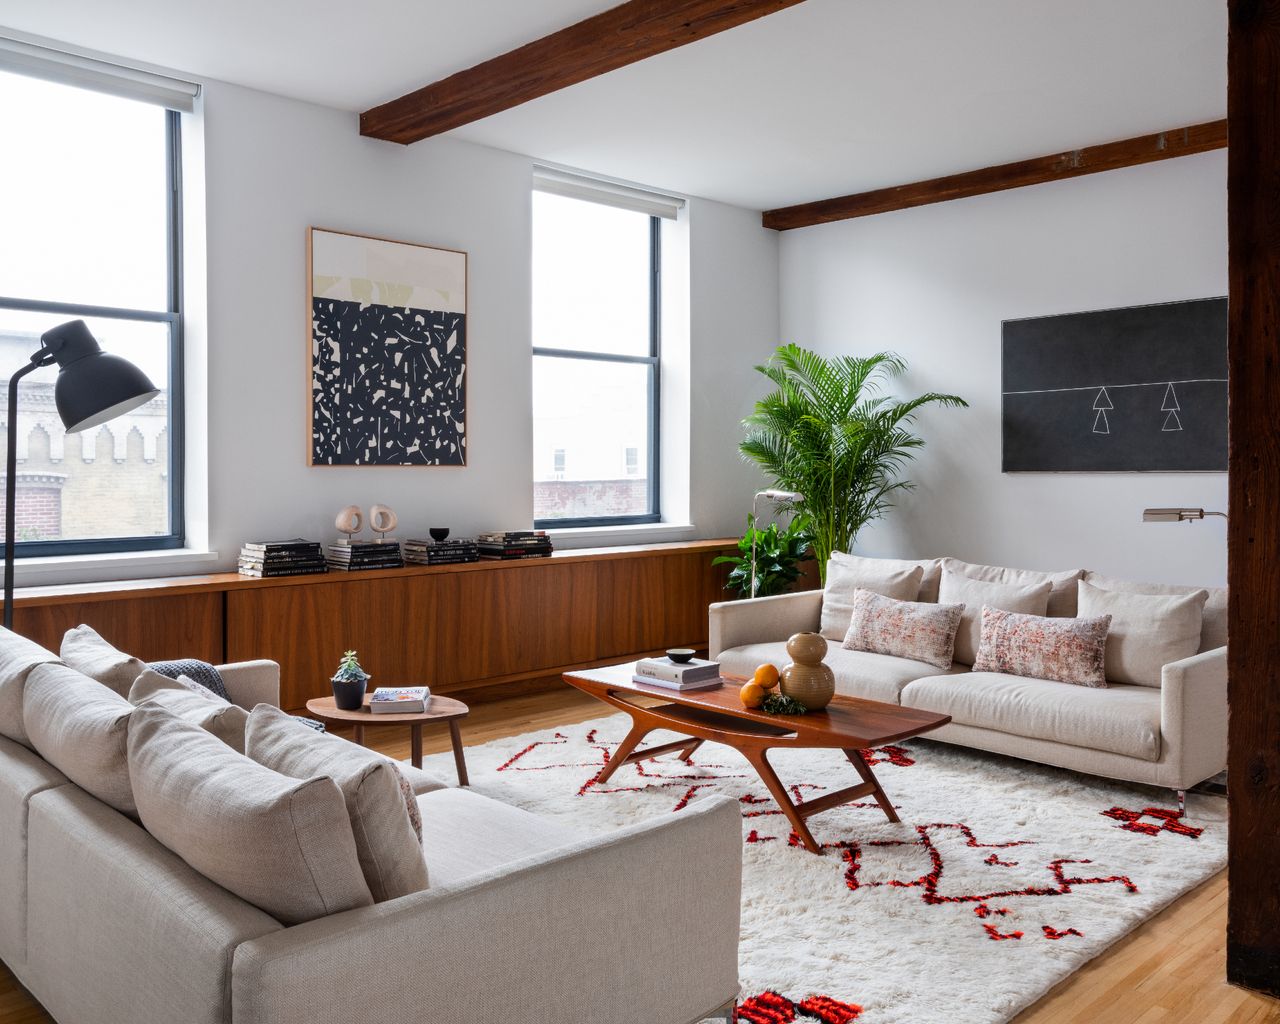 Sofa arranging mistakes: 7 layouts to avoid in a living room